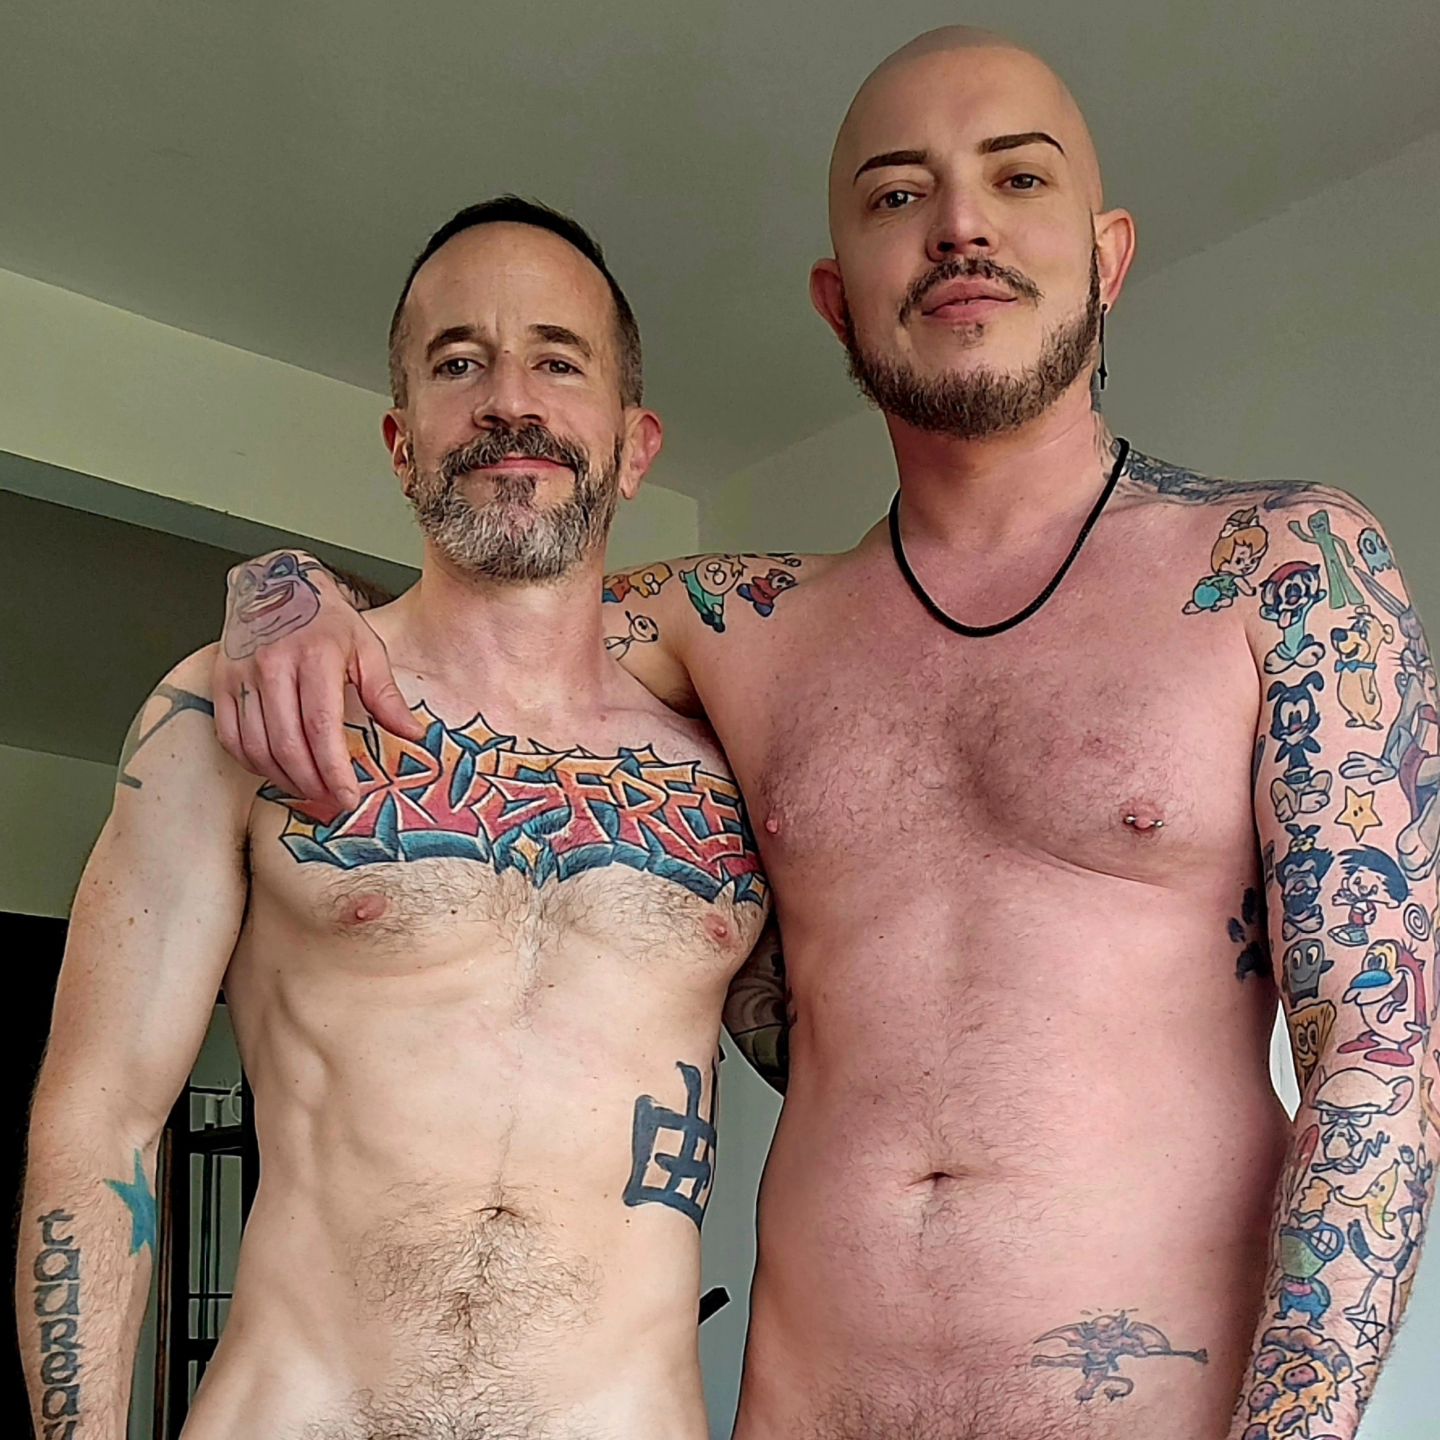 Just hanging out w my bro @whoisjerdaddy 
Guess what we did? 😈

#picoftheday #lgbt #lgbtq #lgbtqia #gay #queer #tattoo #tattoos #friends #bobbyknight #collab #fyp #foryou #discover #fypシ #fypage